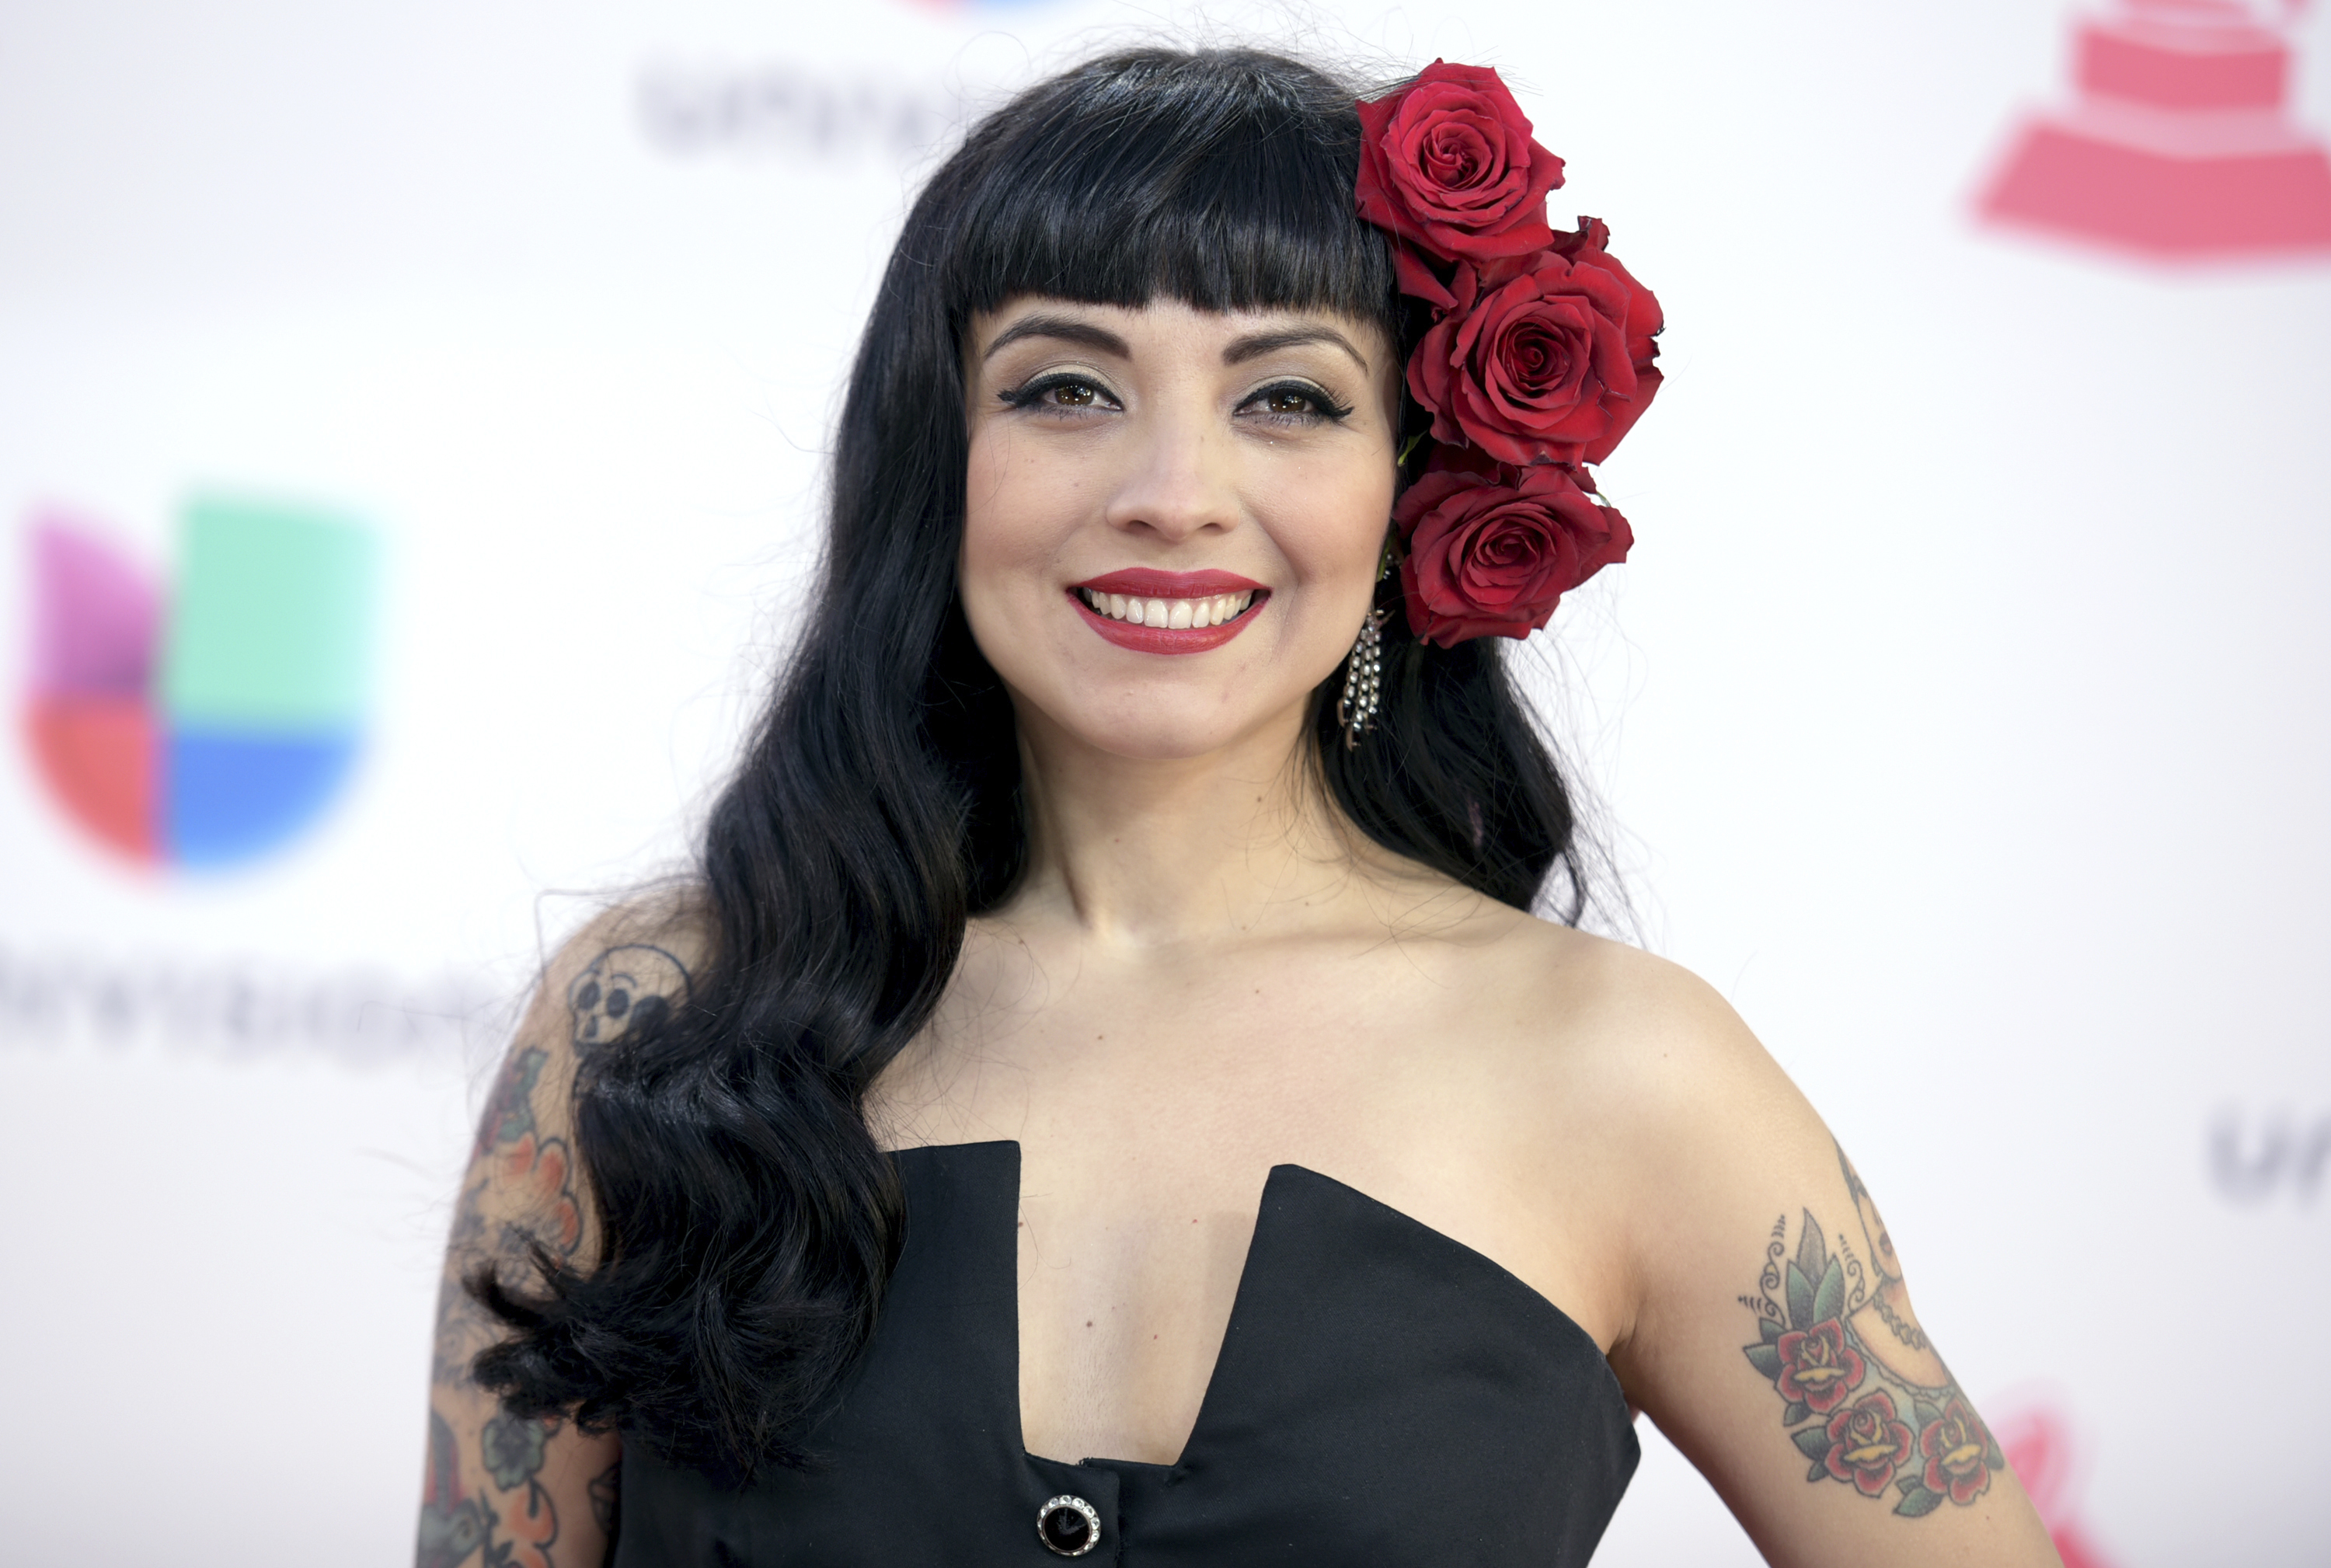 Mon Laferte arrives at the 17th annual Latin Grammy Awards at the T-Mobile Arena on Thursday, Nov. 17, 2016, in Las Vegas. (Photo by Richard Shotwell/Invision/AP)